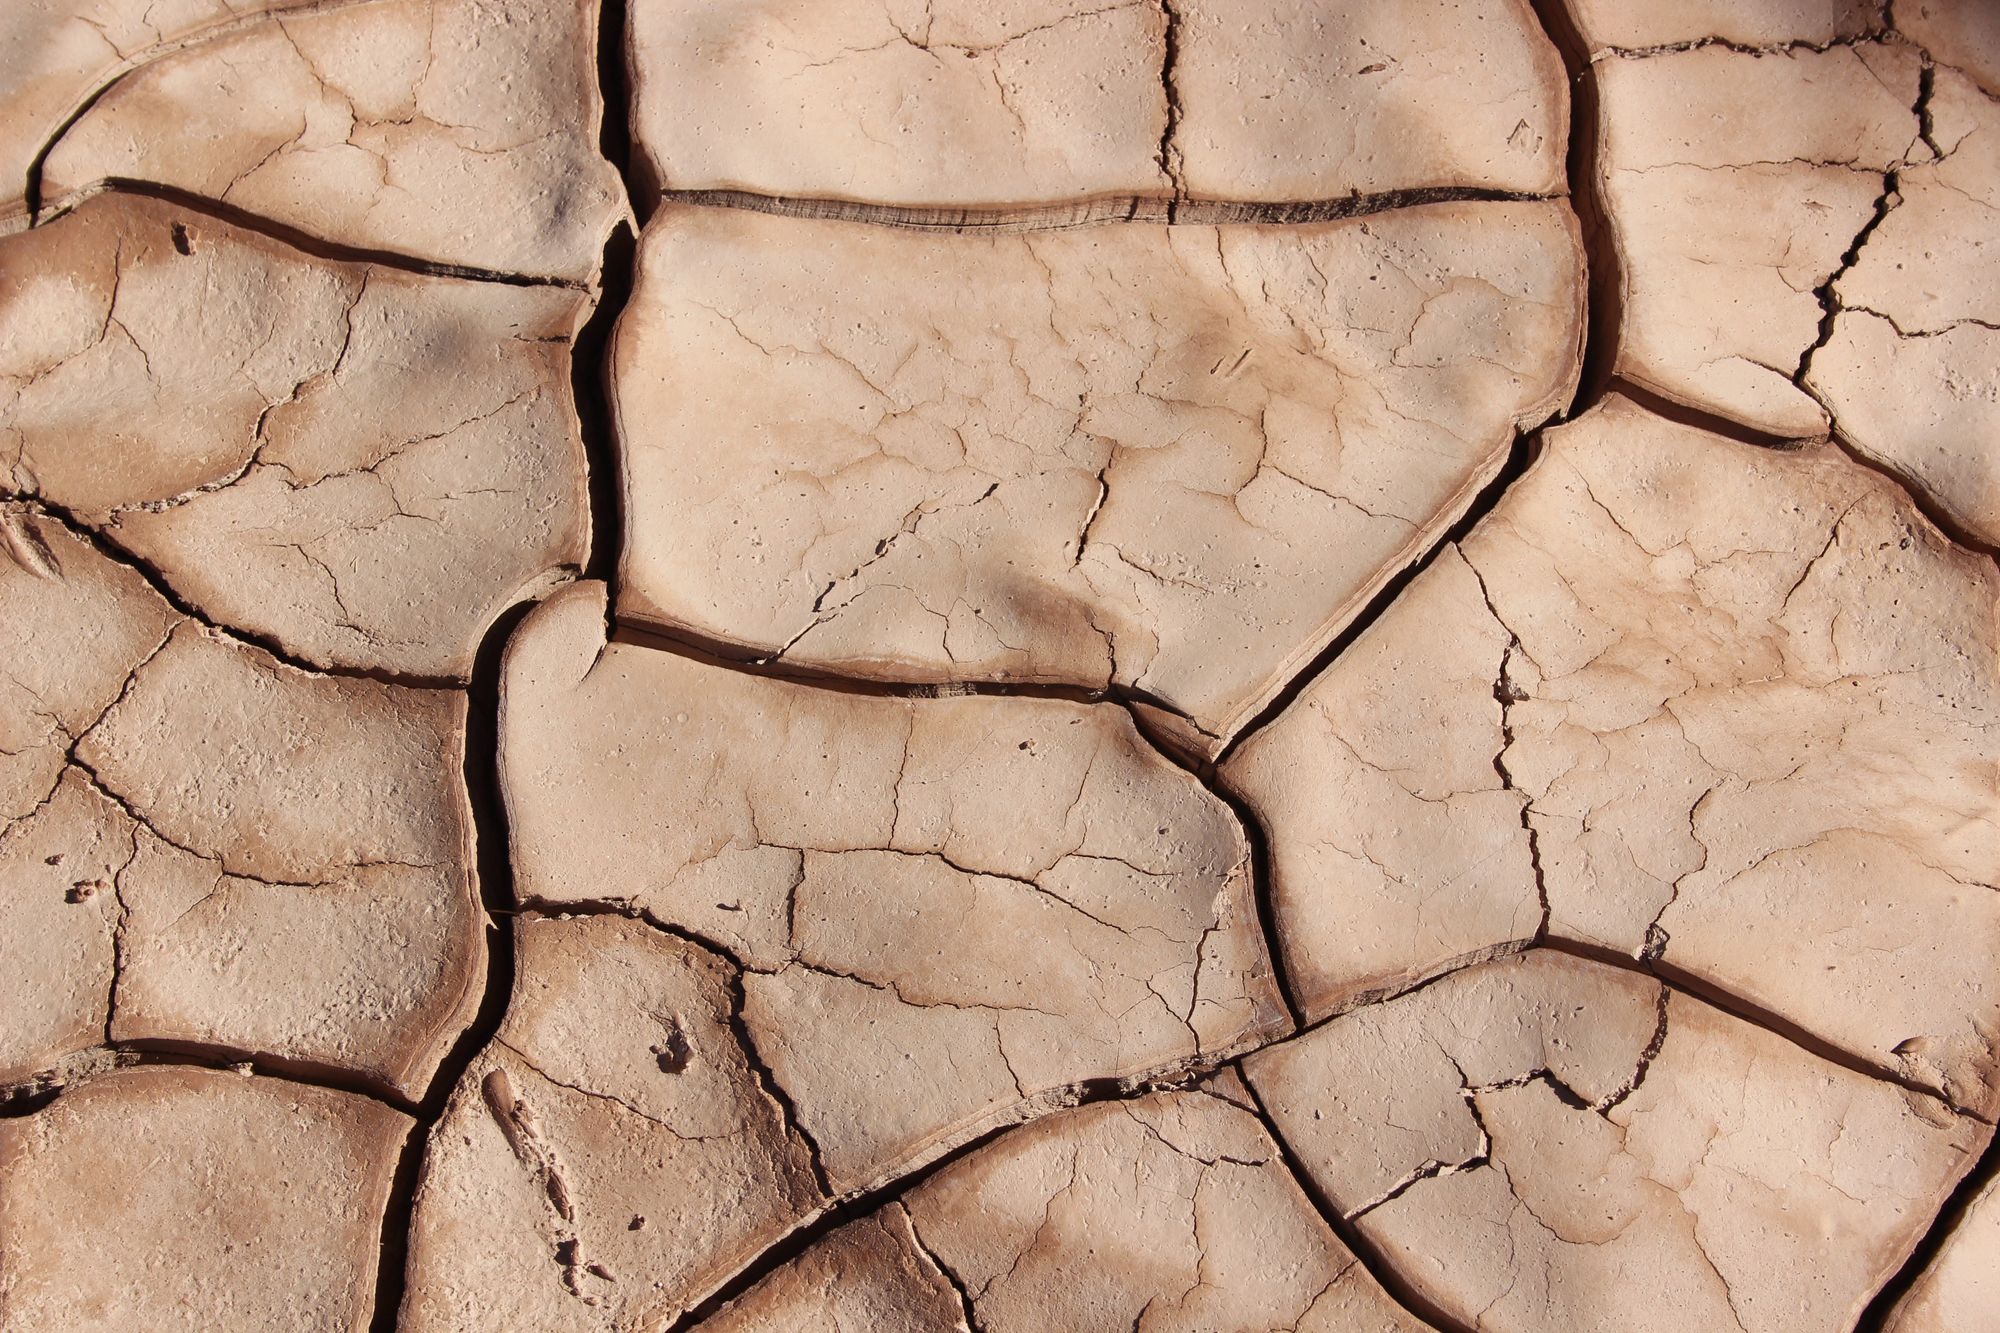 Picture of a dried mudplain, with cracked soil.